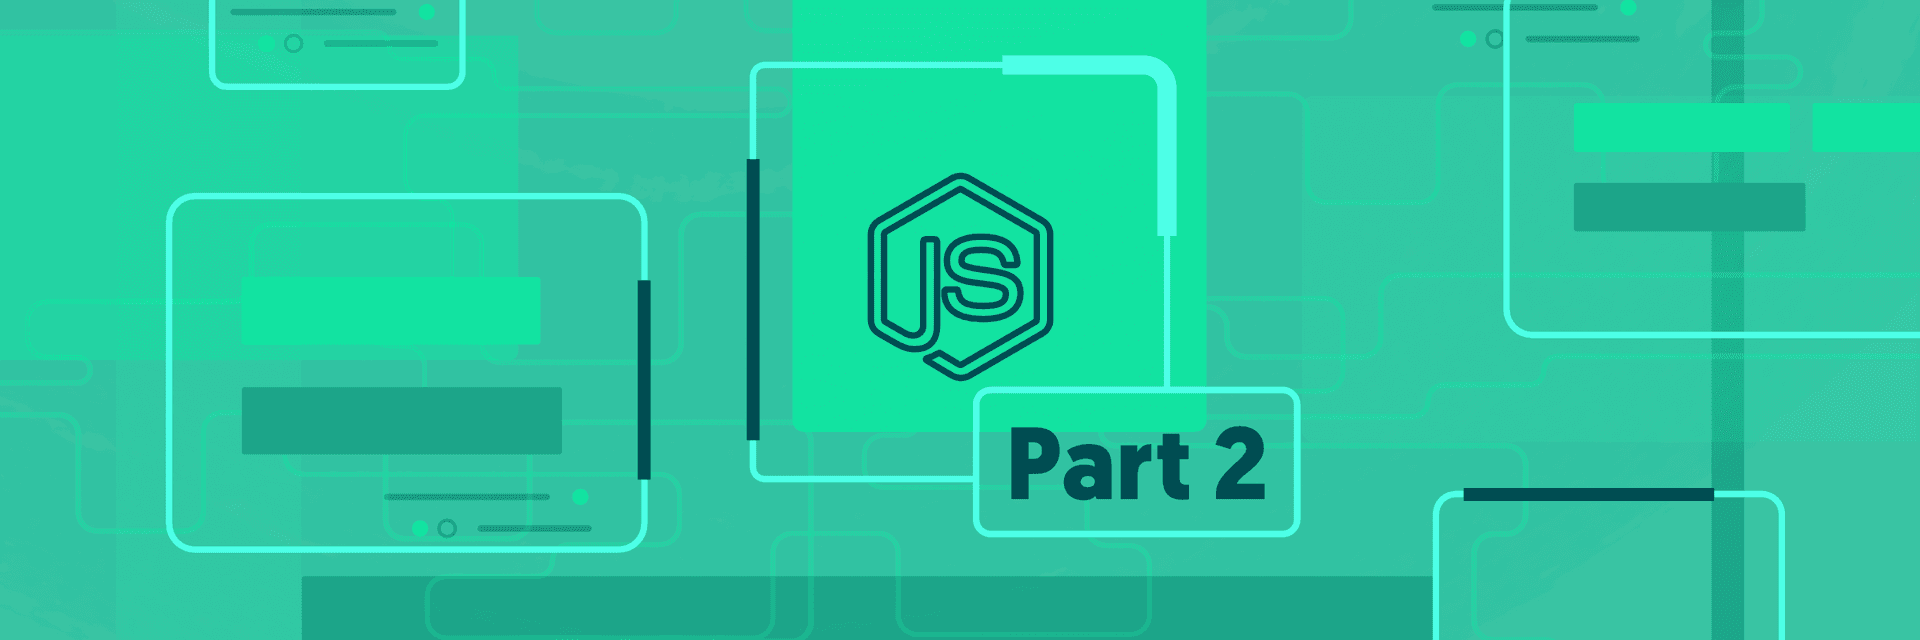 Creating an Identity Service with Node.js Part 2